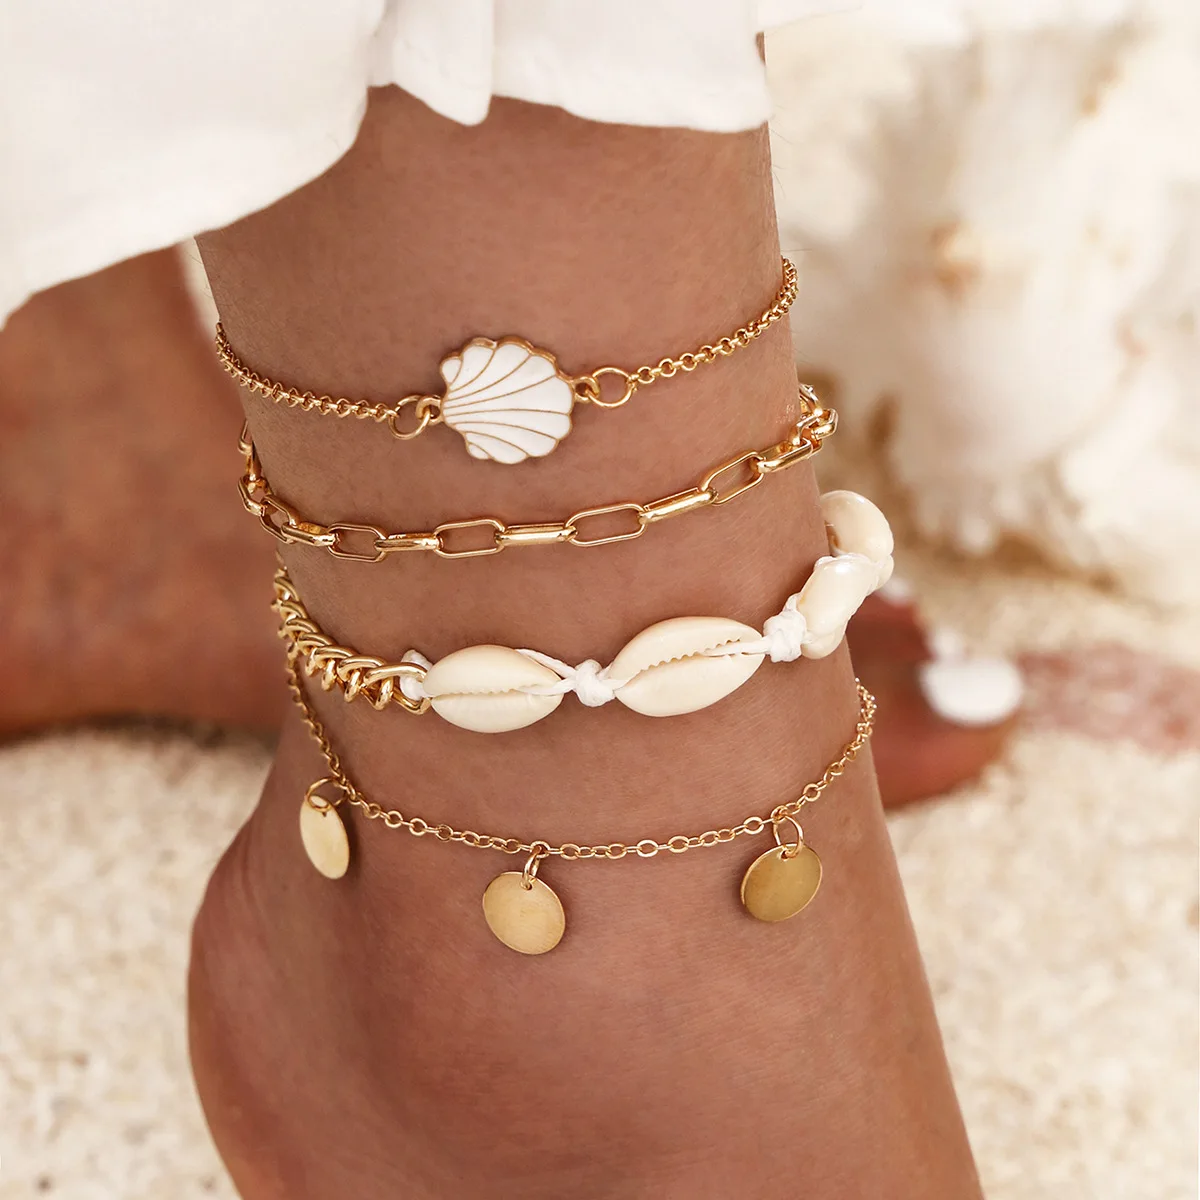 

4pc/Set Bohemia Shell Chain Anklet Sets For Women Sequins Ankle Bracelet On Leg Foot Trendy Summer Beach Jewelry Gift